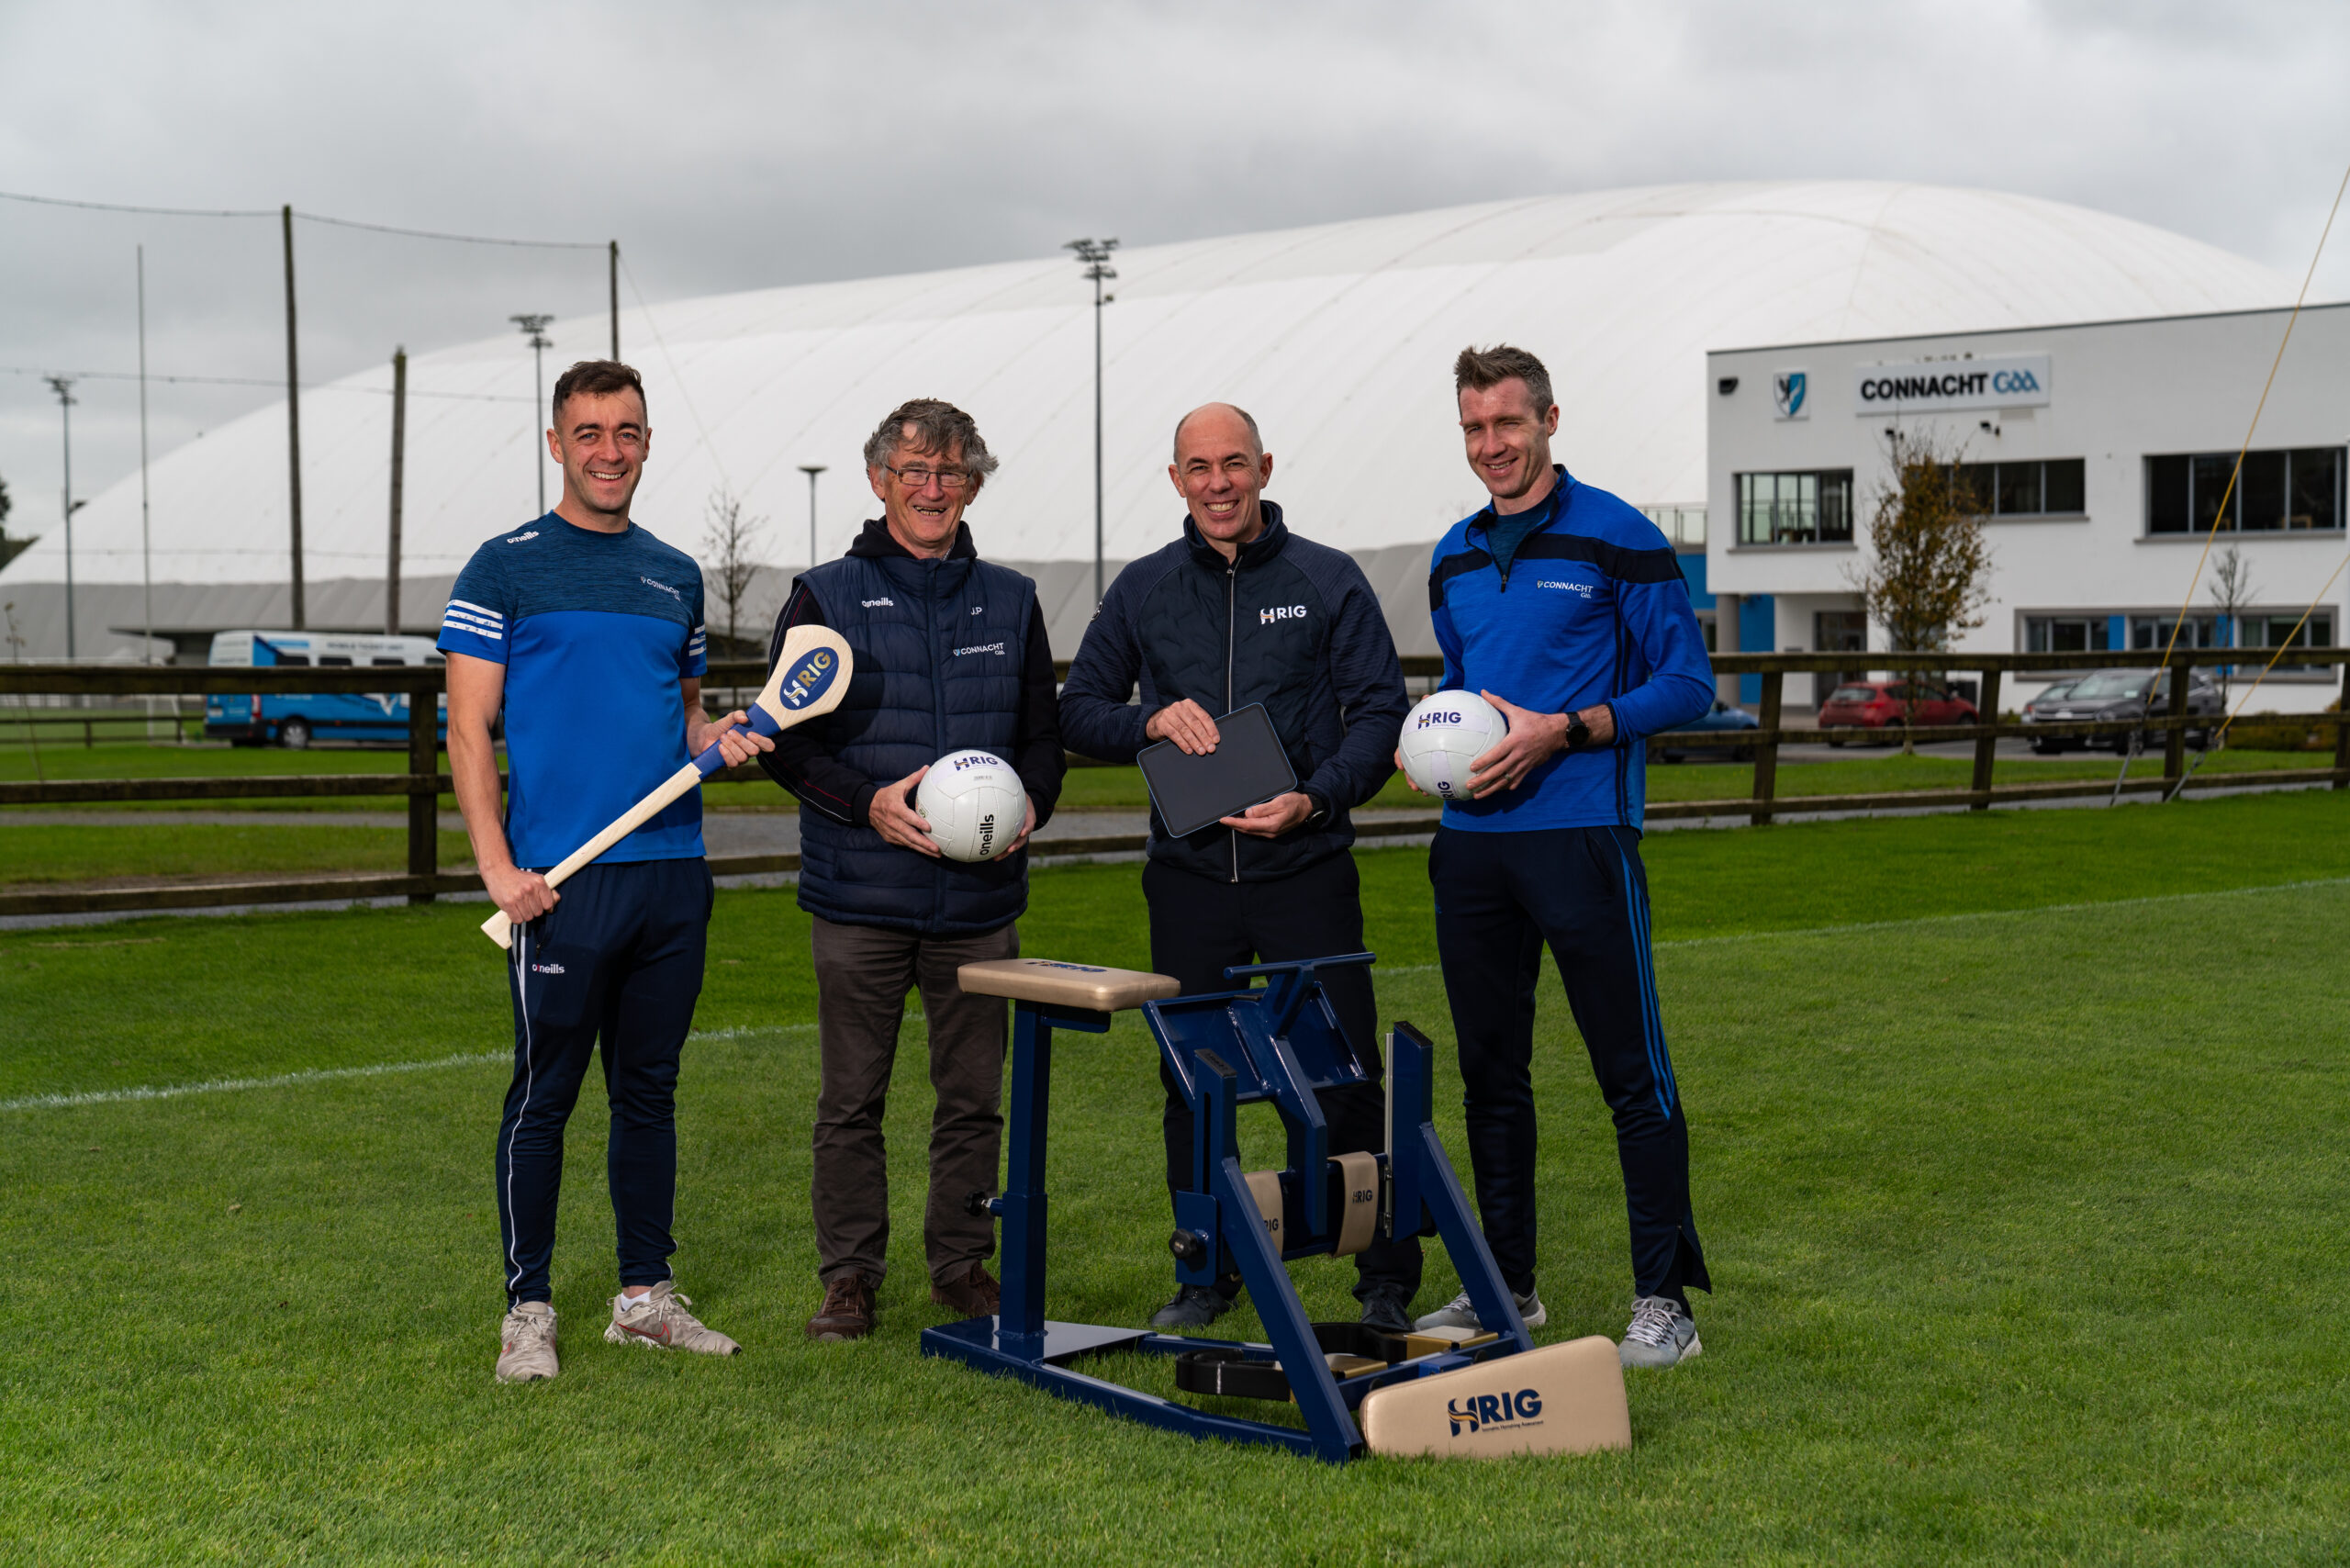 Connacht GAA Centre of Excellence Leading the Way in Gaelic Games